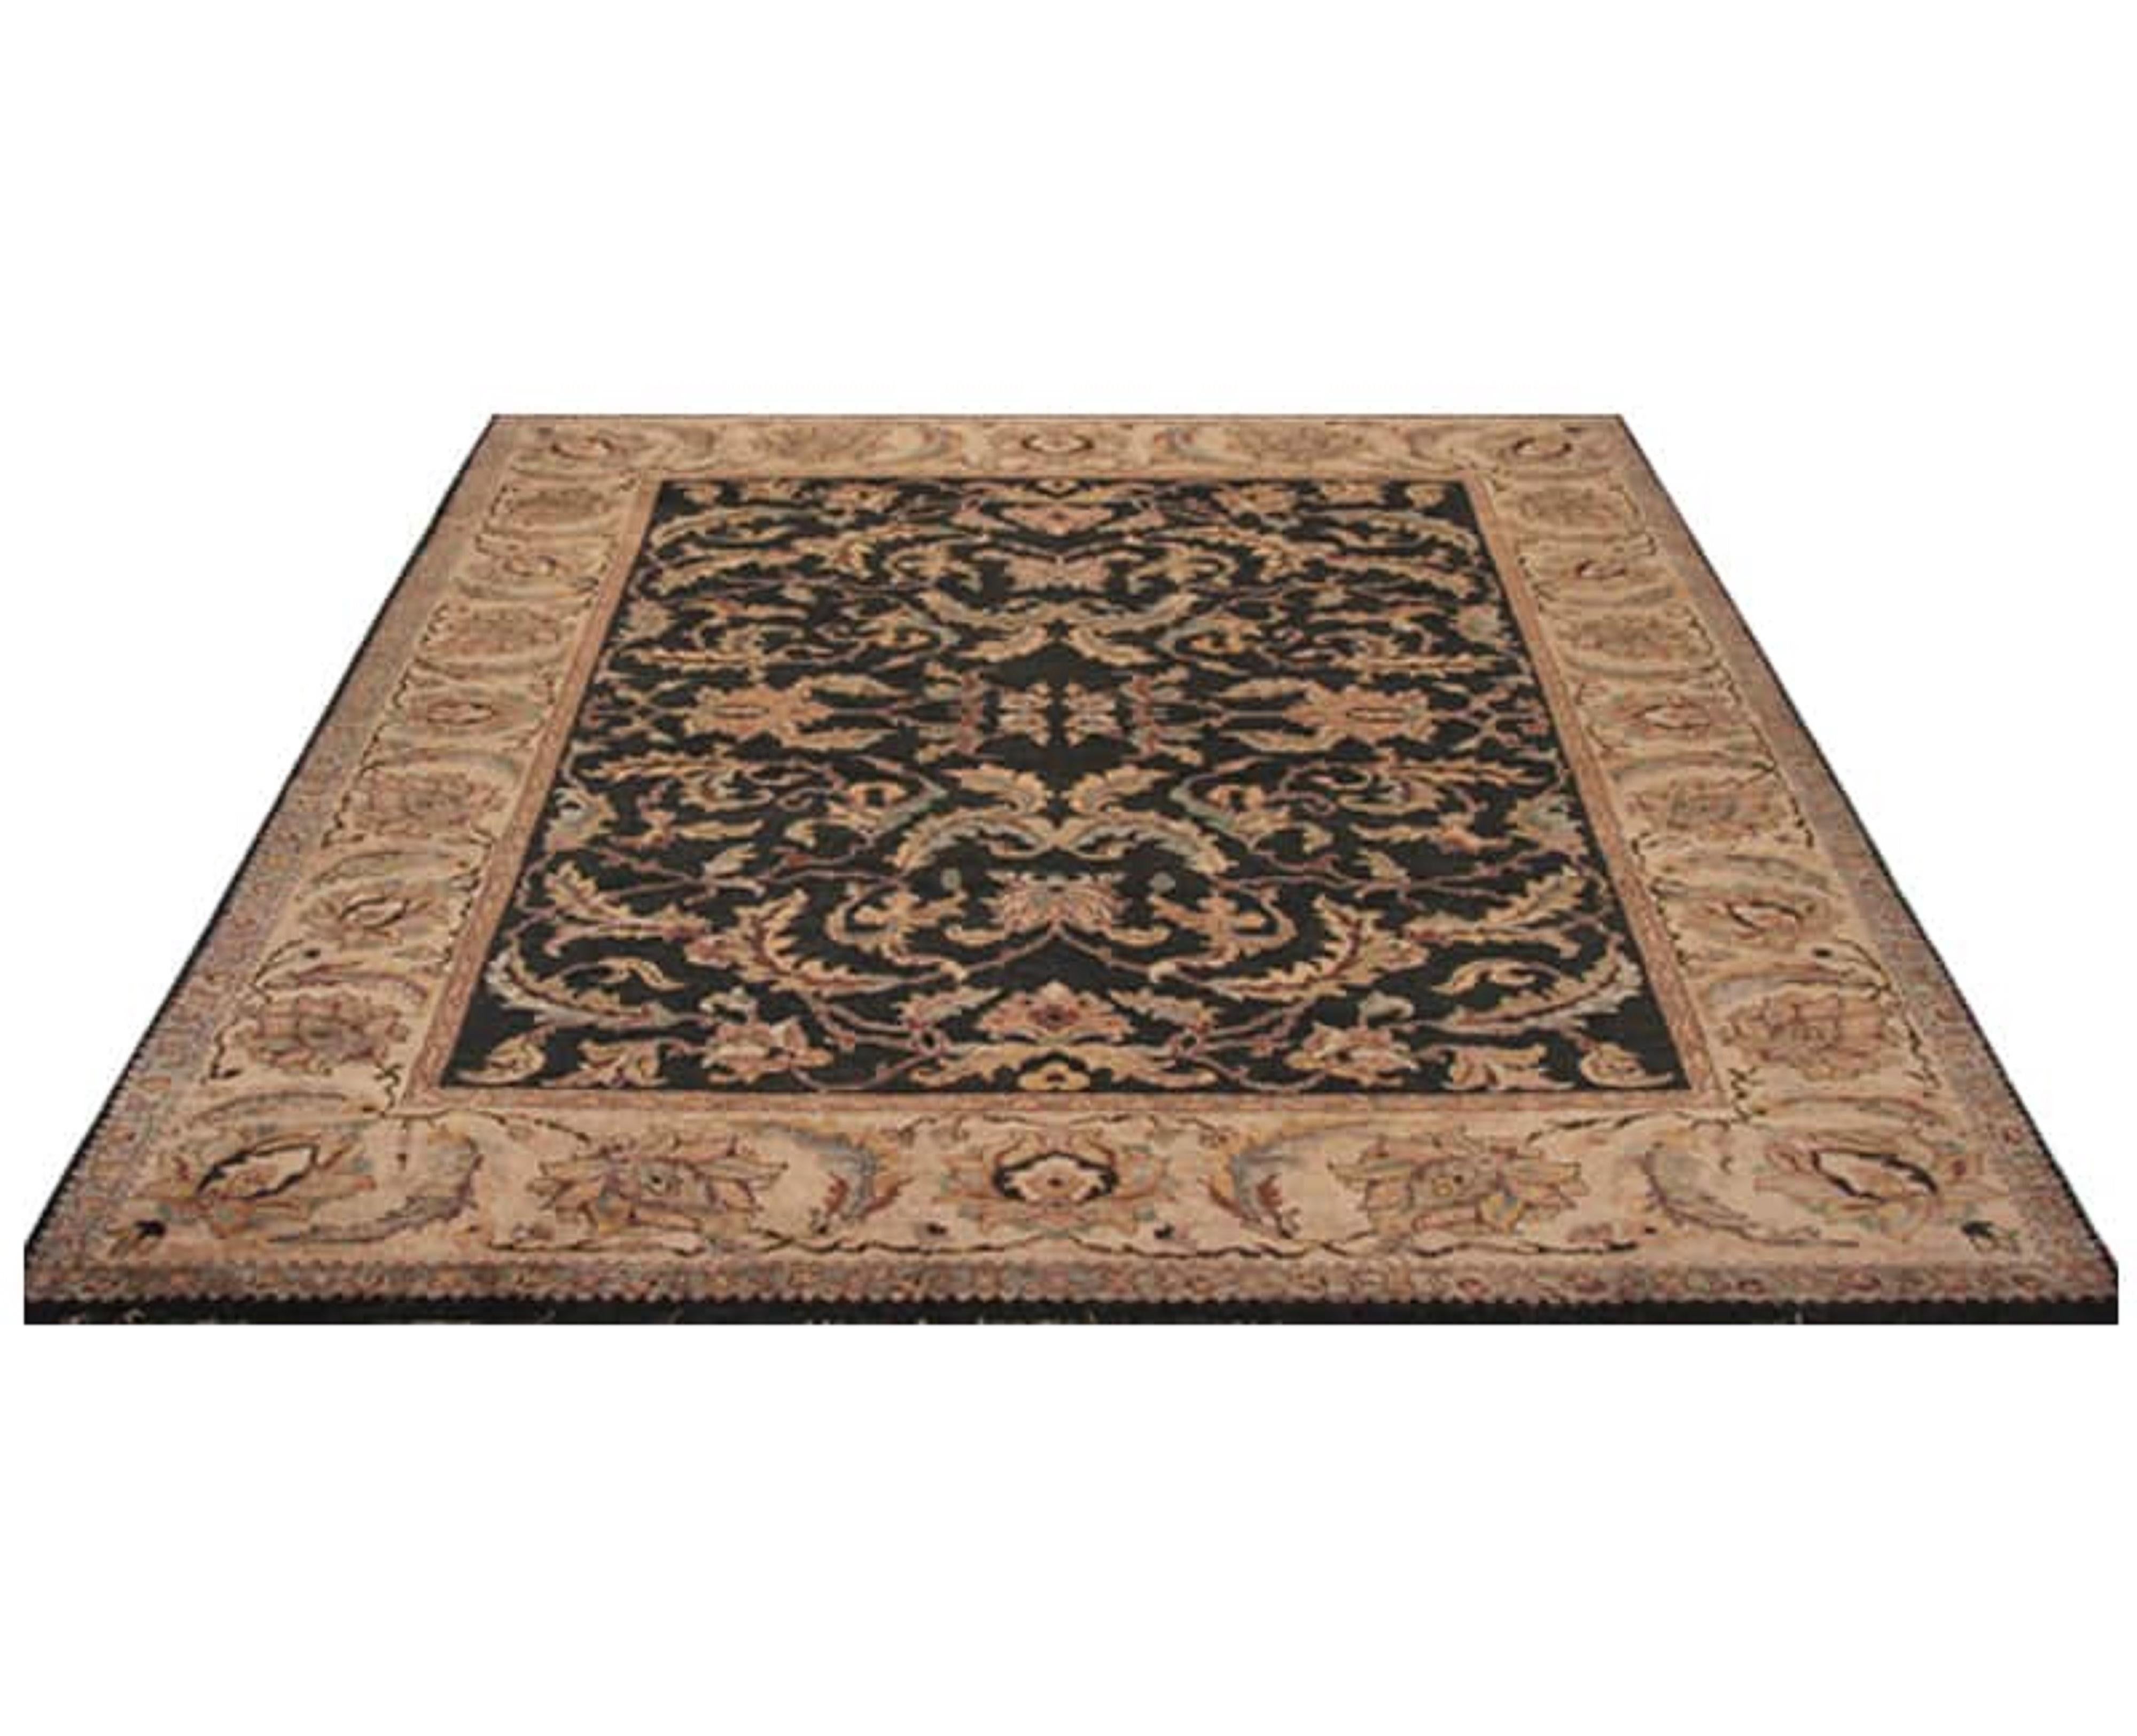 Traditional handwoven Indian Agra rug recreation – traditional handwoven Indian Agra rug featuring an elegant all-over stylized floral design rendered in a plush field of charcoal surrounded by a beautiful beige-colored border featuring a similarly